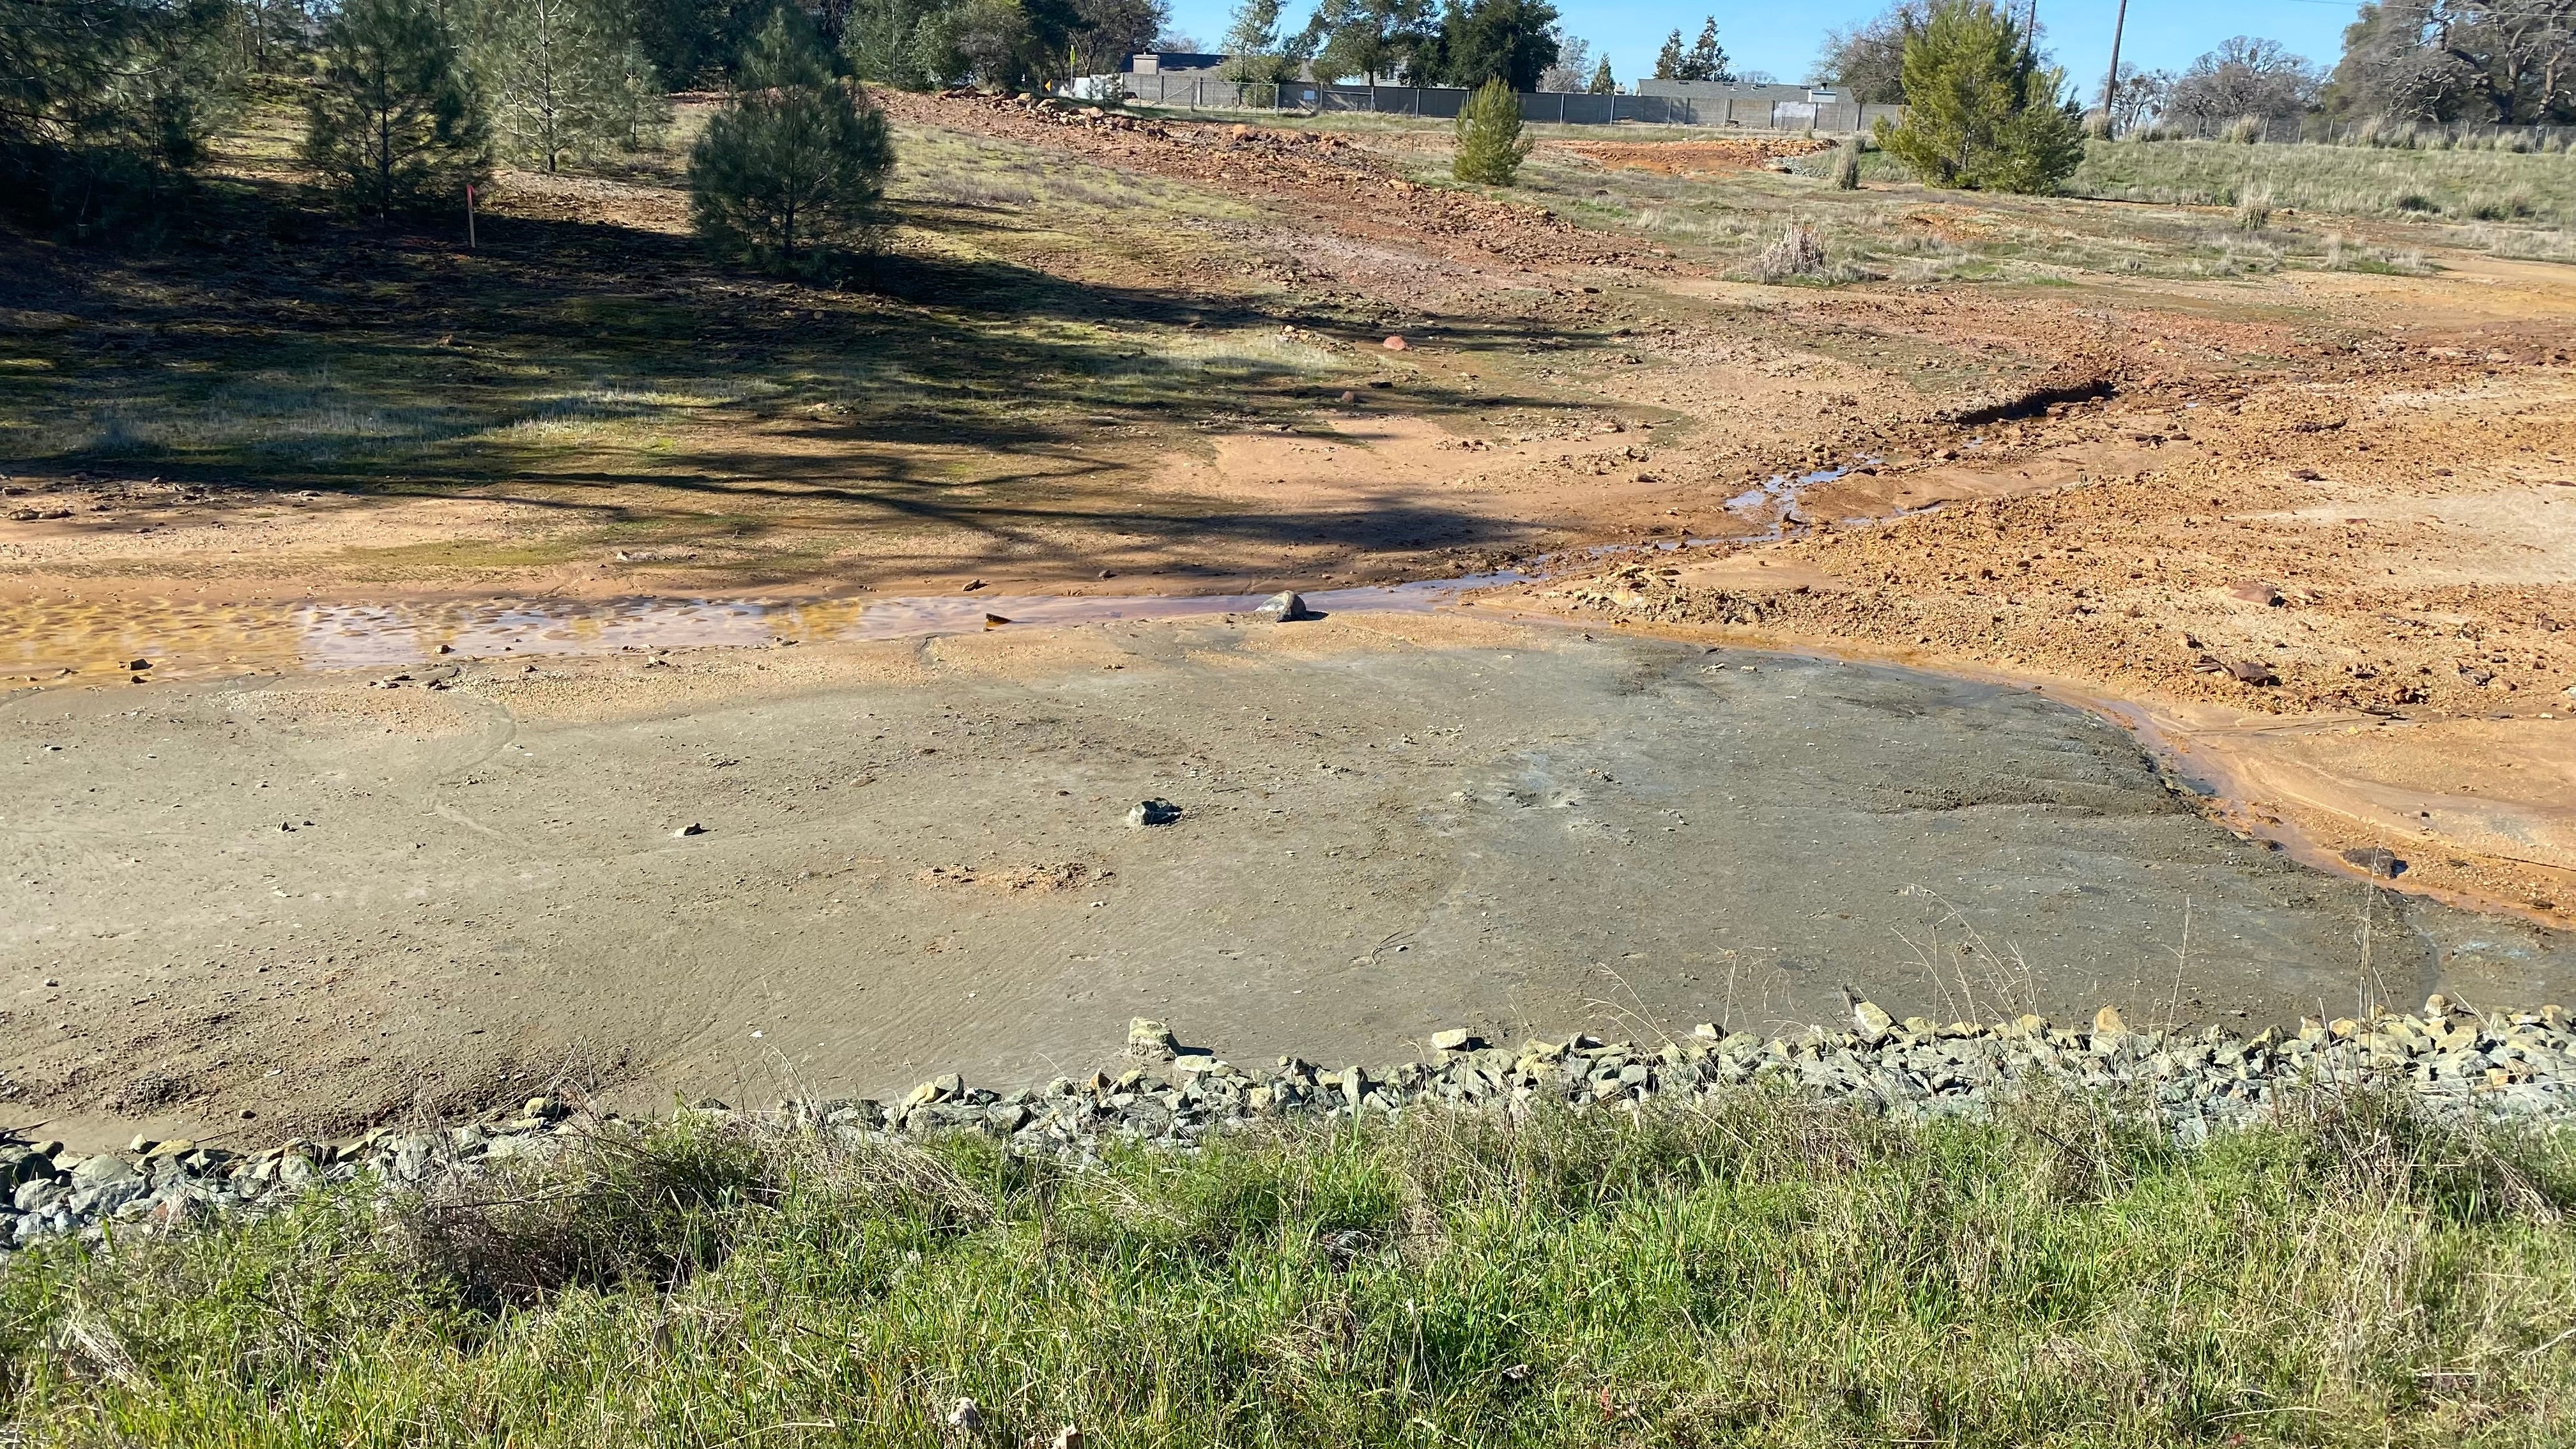 The Tailings 4 area, as the EPA calls it, of the Argonaut Mine Superfund site is relatively nondescript. Soil testing confirmed that this vacant lot had some of the highest levels of arsenic on the site, hundreds of times above acceptable limits. Clean-up has been ongoing across the site since 2015. (Photo: Leah Campbell)